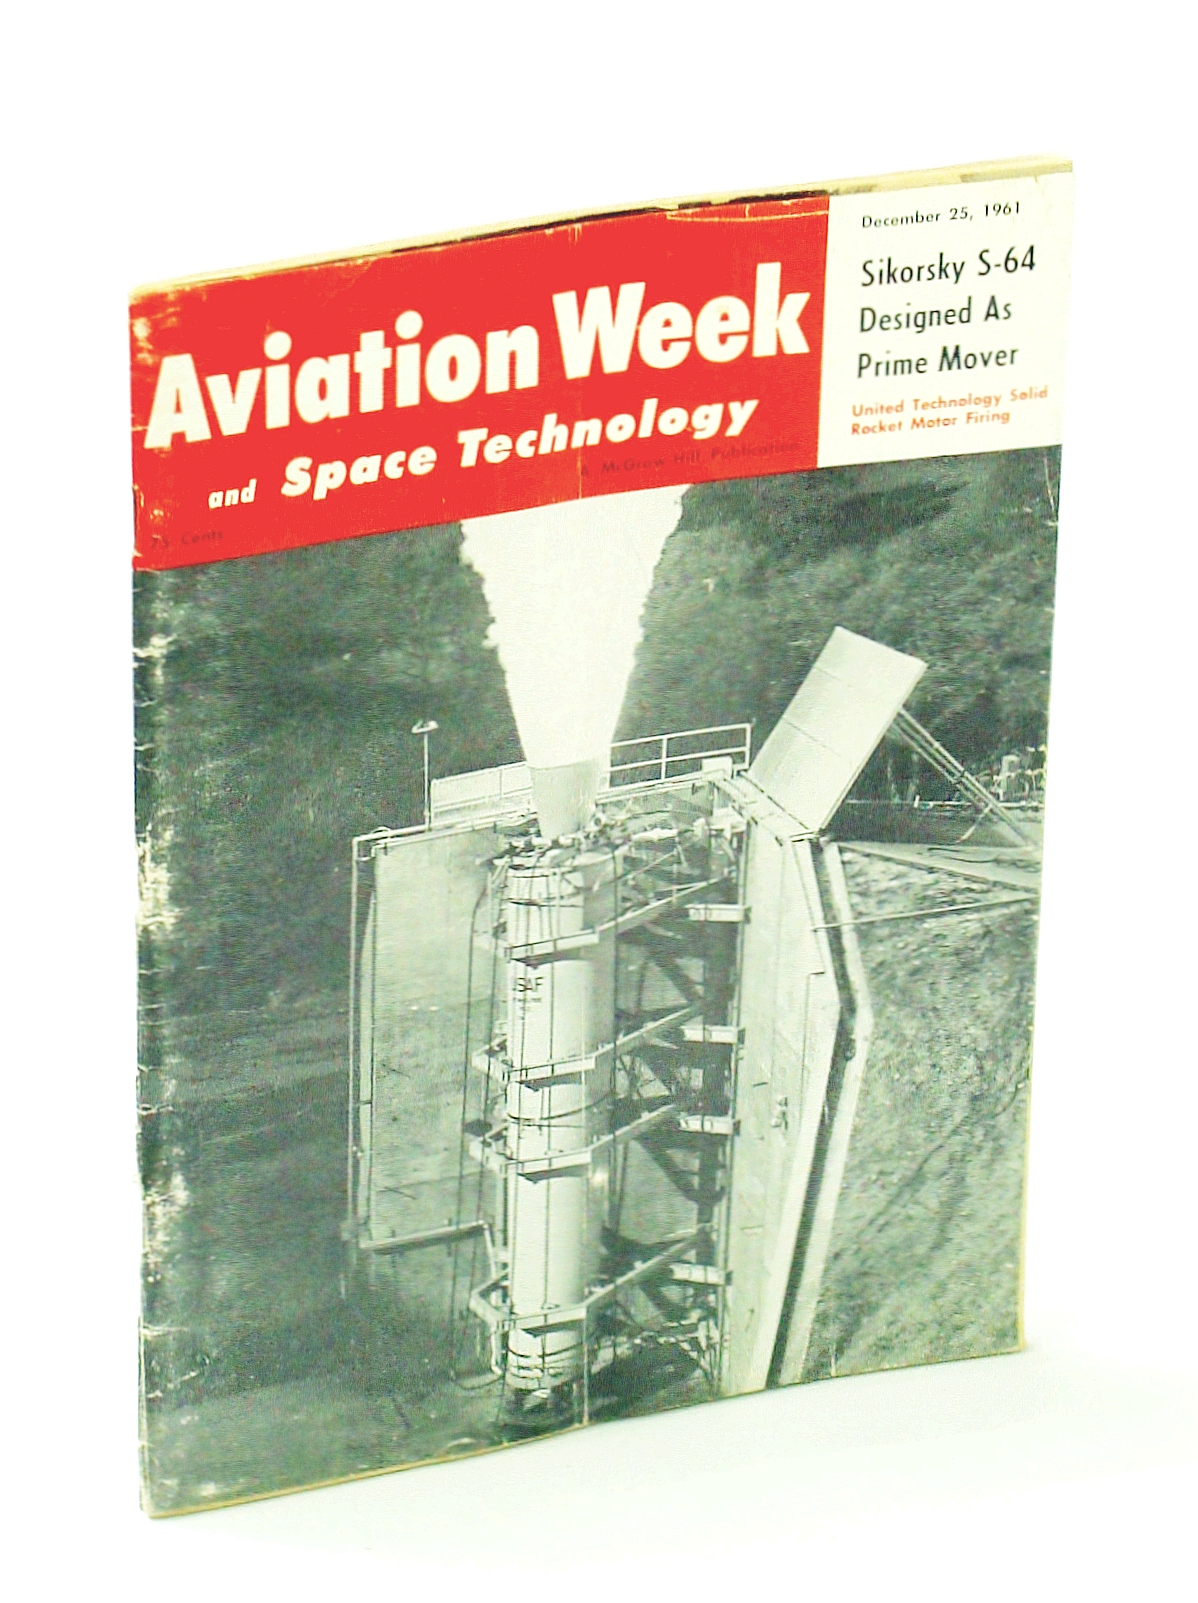 Image for Aviation Week and Space Technology Magazine, 25 December 1961, Vol. 75, No. 26 - Sikorsky S-64 Feature Article